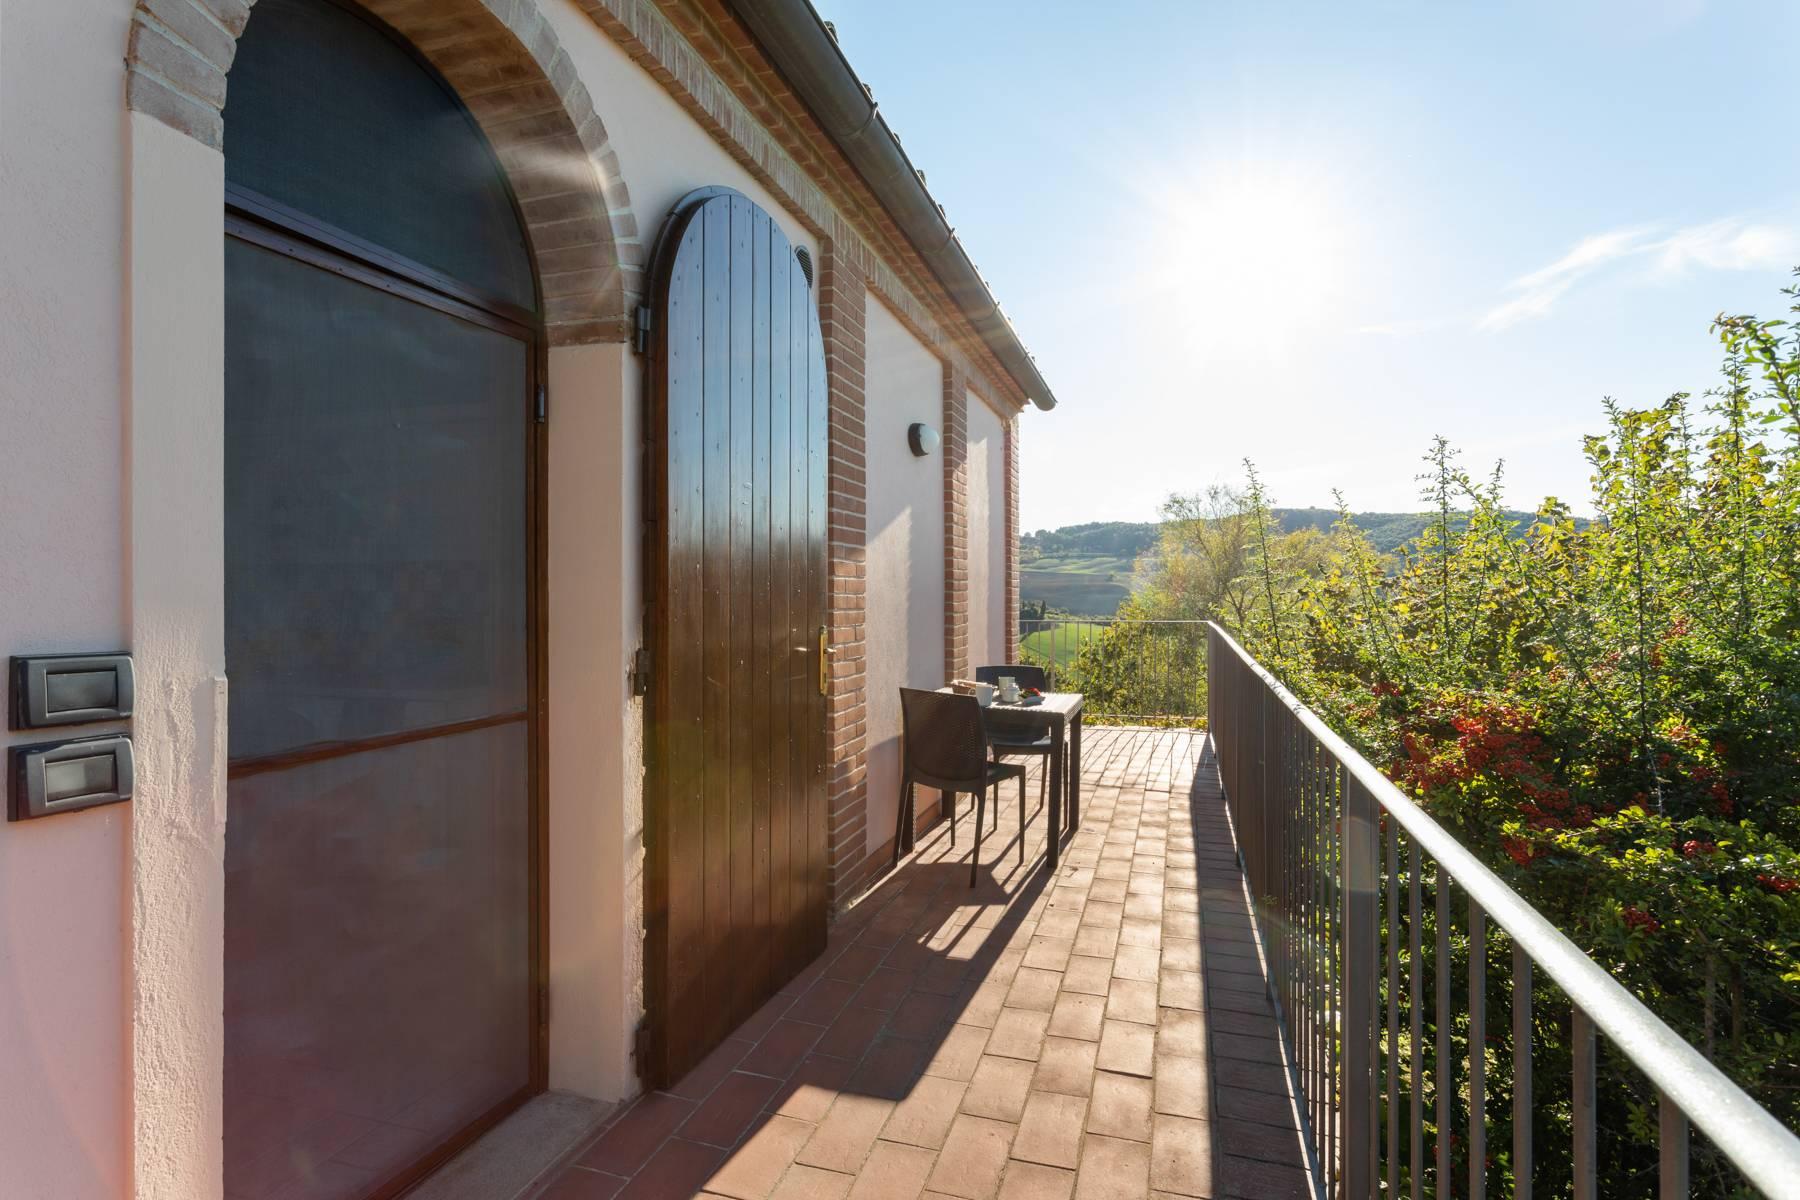 Beautiful country house with agriturismo and vineyard walking distance from Montepulciano - 11